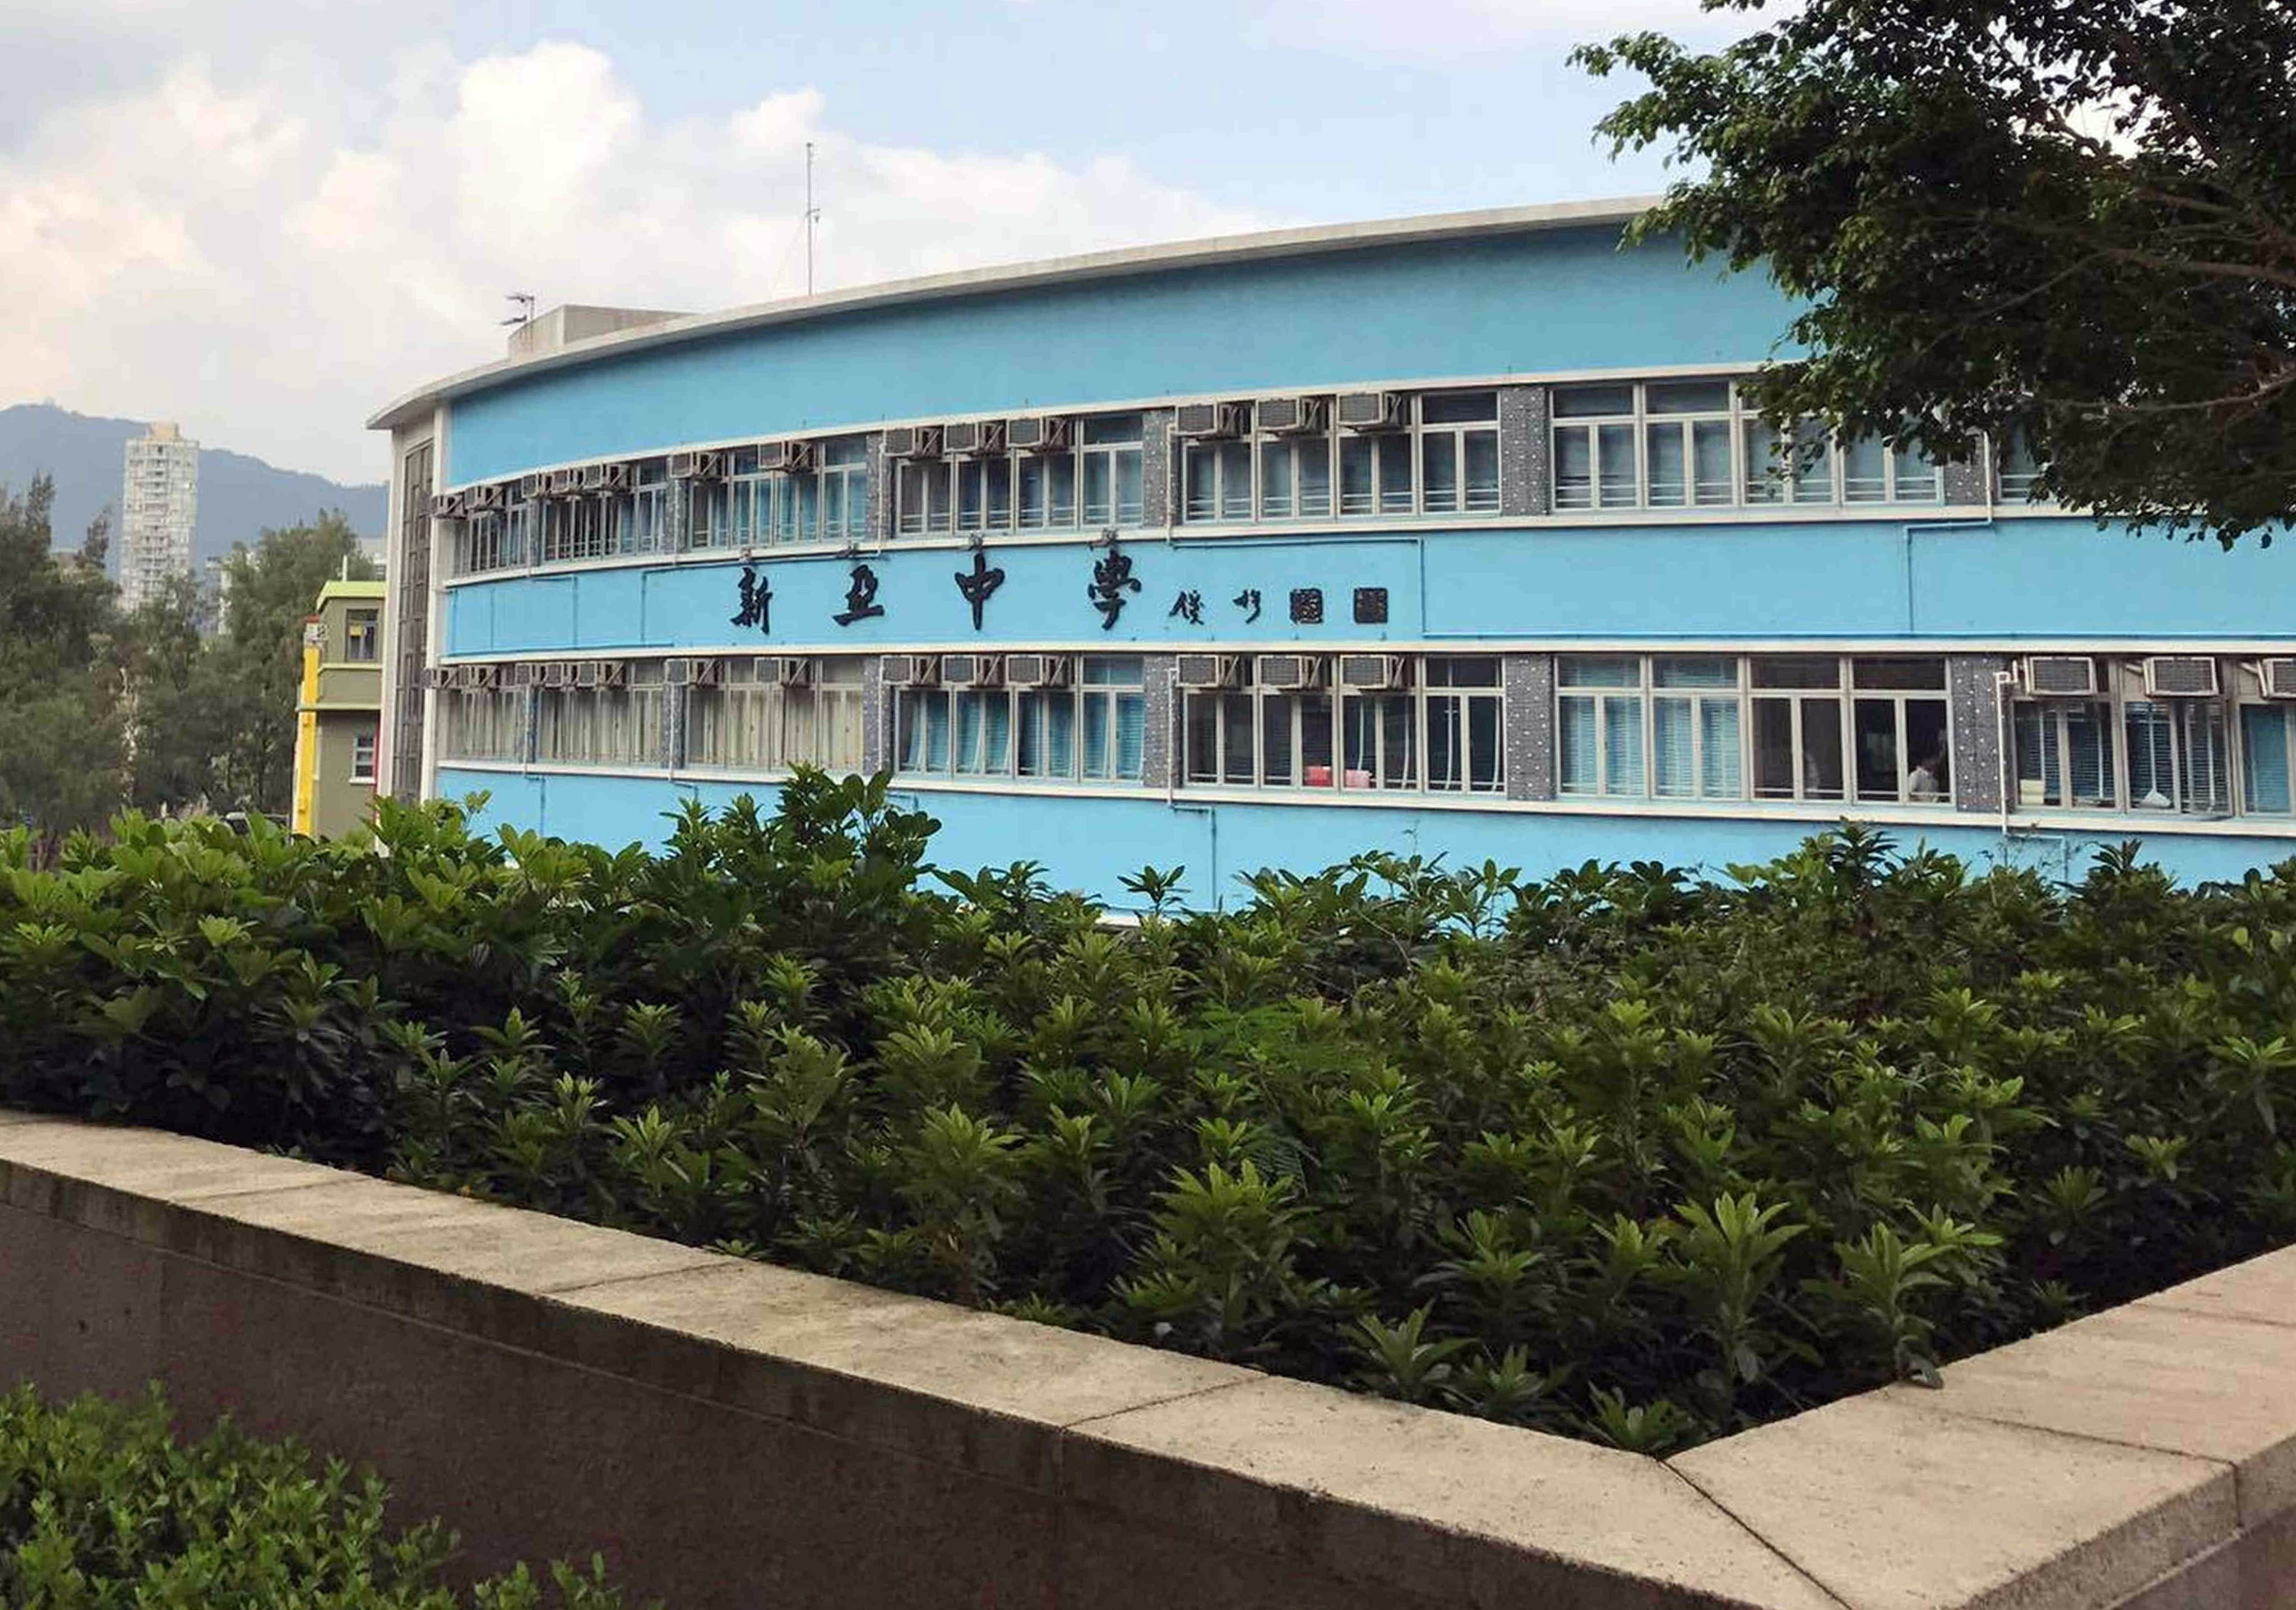 Eleven students from New Asia Middle School in To Kwa Wan were taken to hospital after a suspected gas leak at the secondary school. Photo: Handout